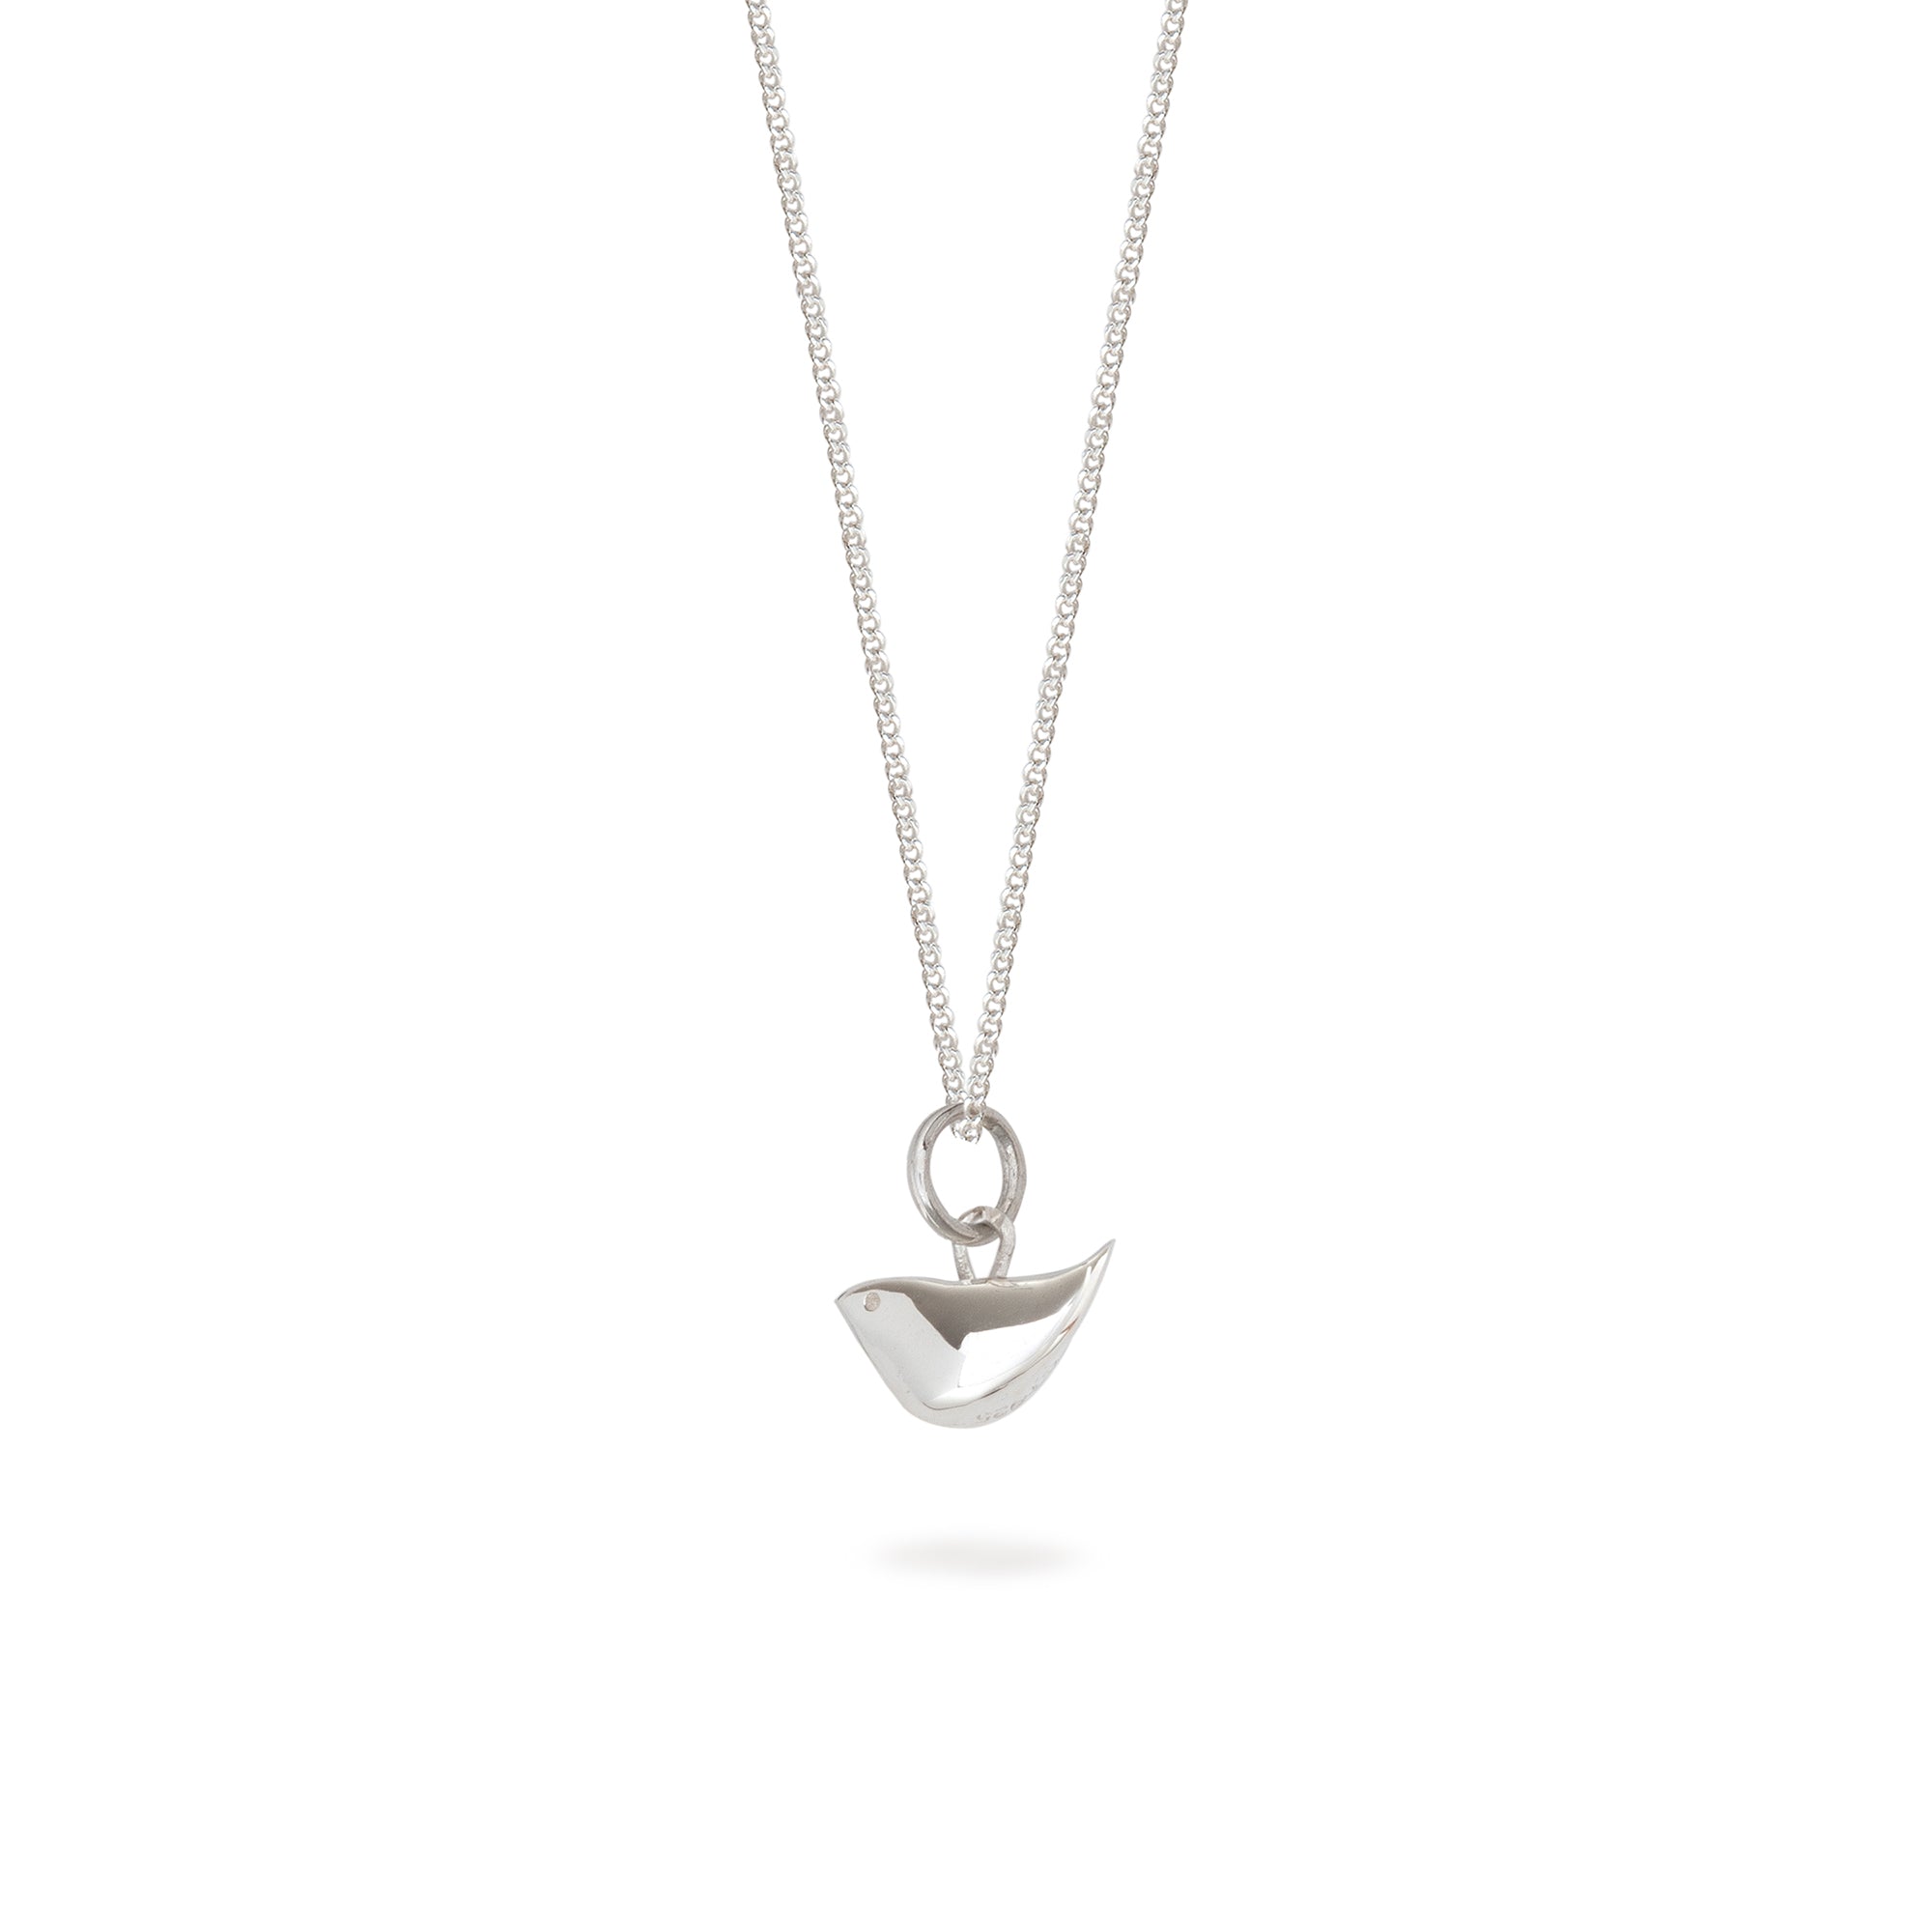 Tiny Bird Charm Necklace Sterling Silver